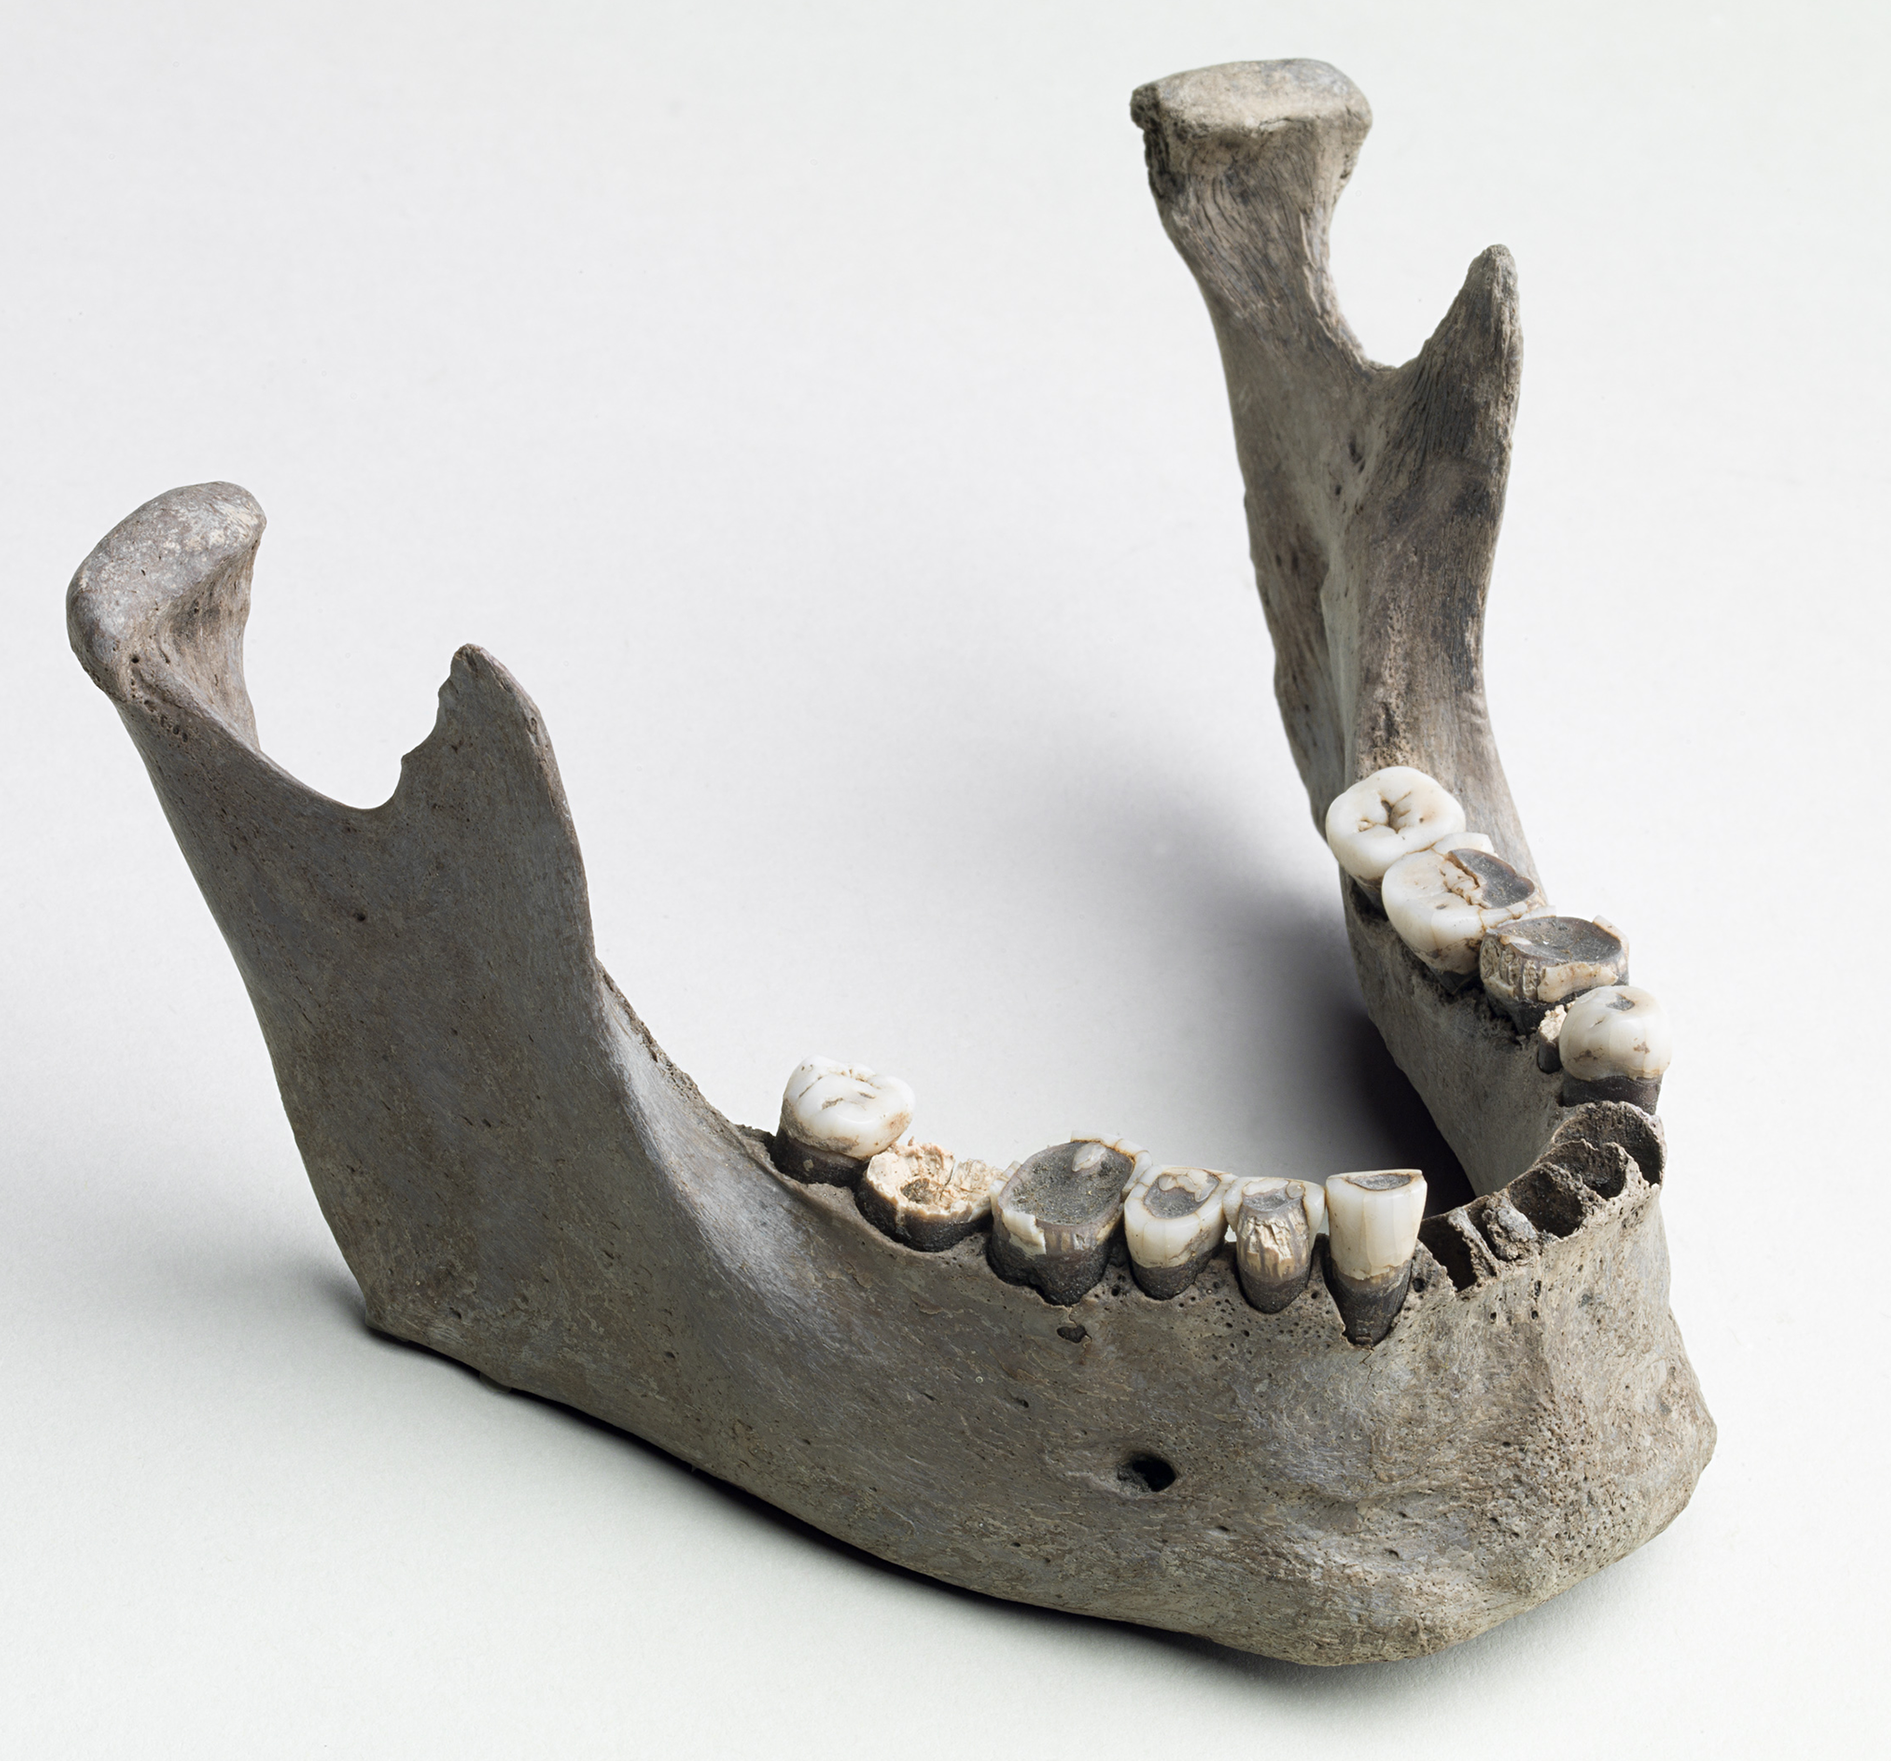 an entire human jawbone, with most teeth intact, showing signs of wear on the crown. at least 4 teeth at the front are missing. specimen photographed on seamless white background